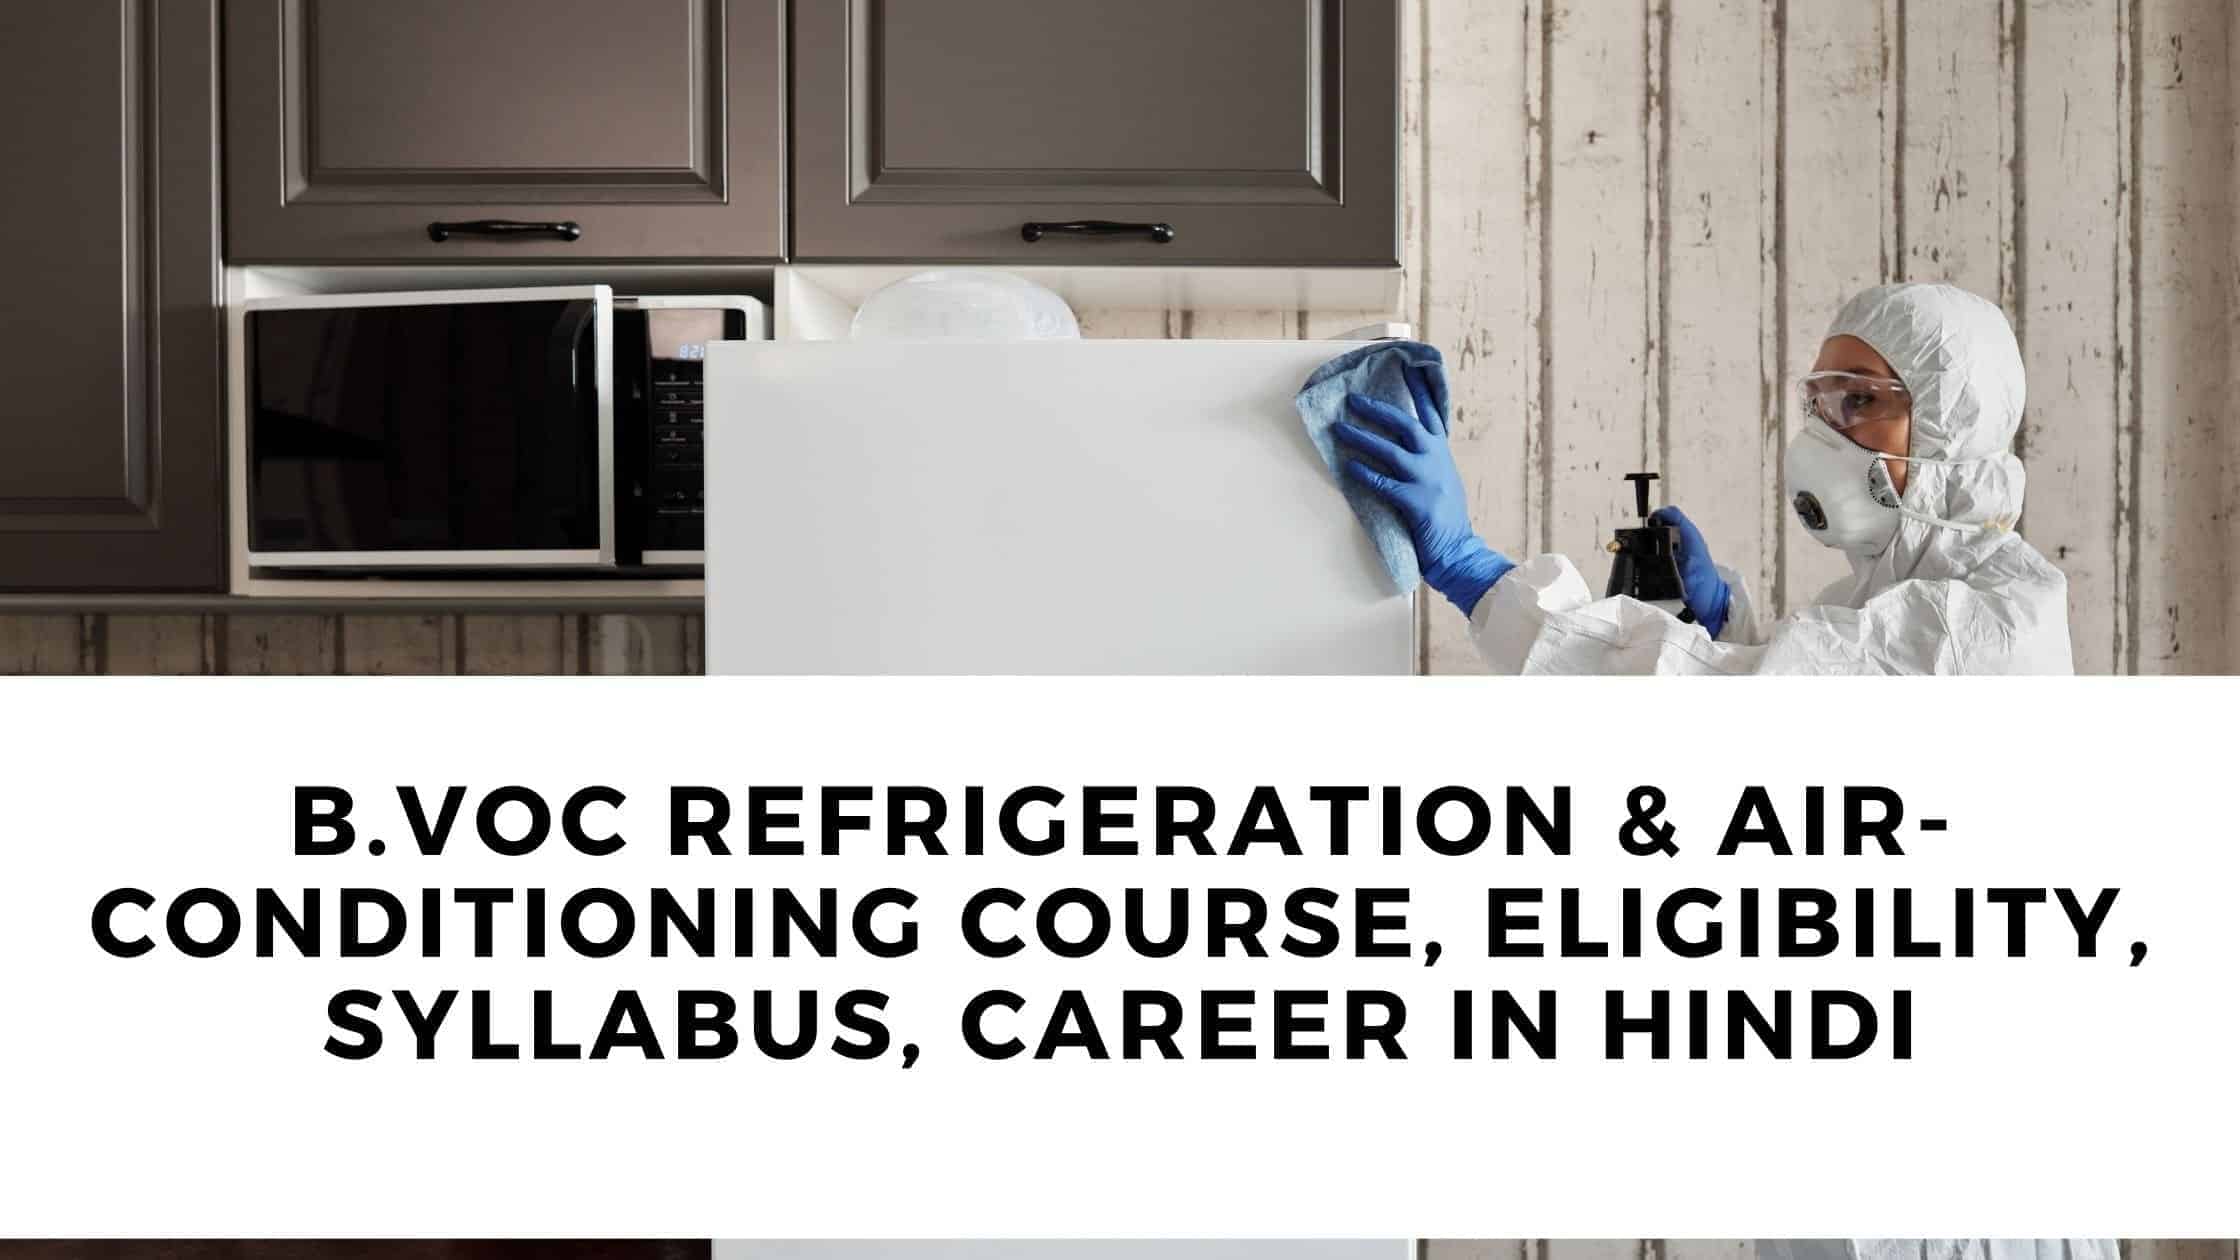 B.Voc Refrigeration & Air-Conditioning course, Eligibility, Syllabus, Career in Hindi